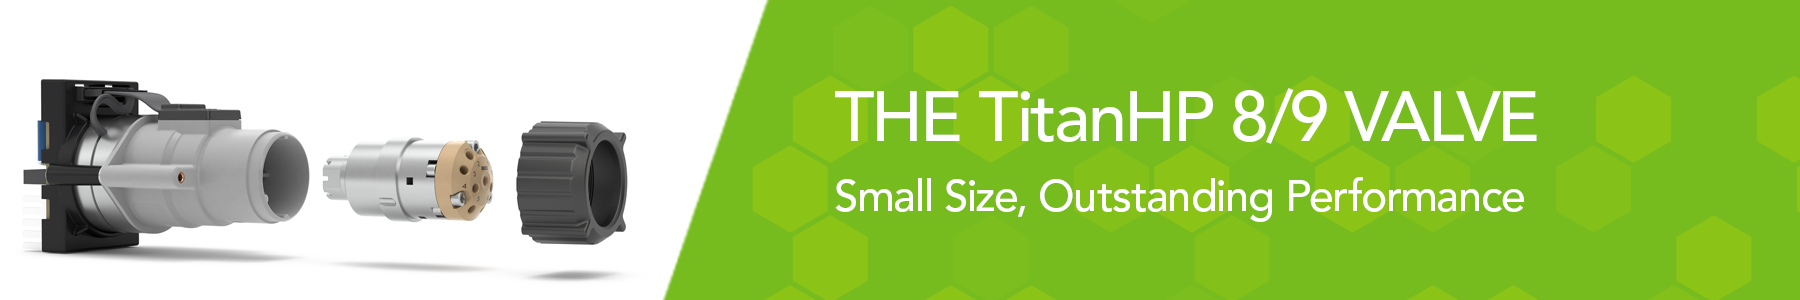 The TitanHP 8/9 valve - small size, outstanding performance